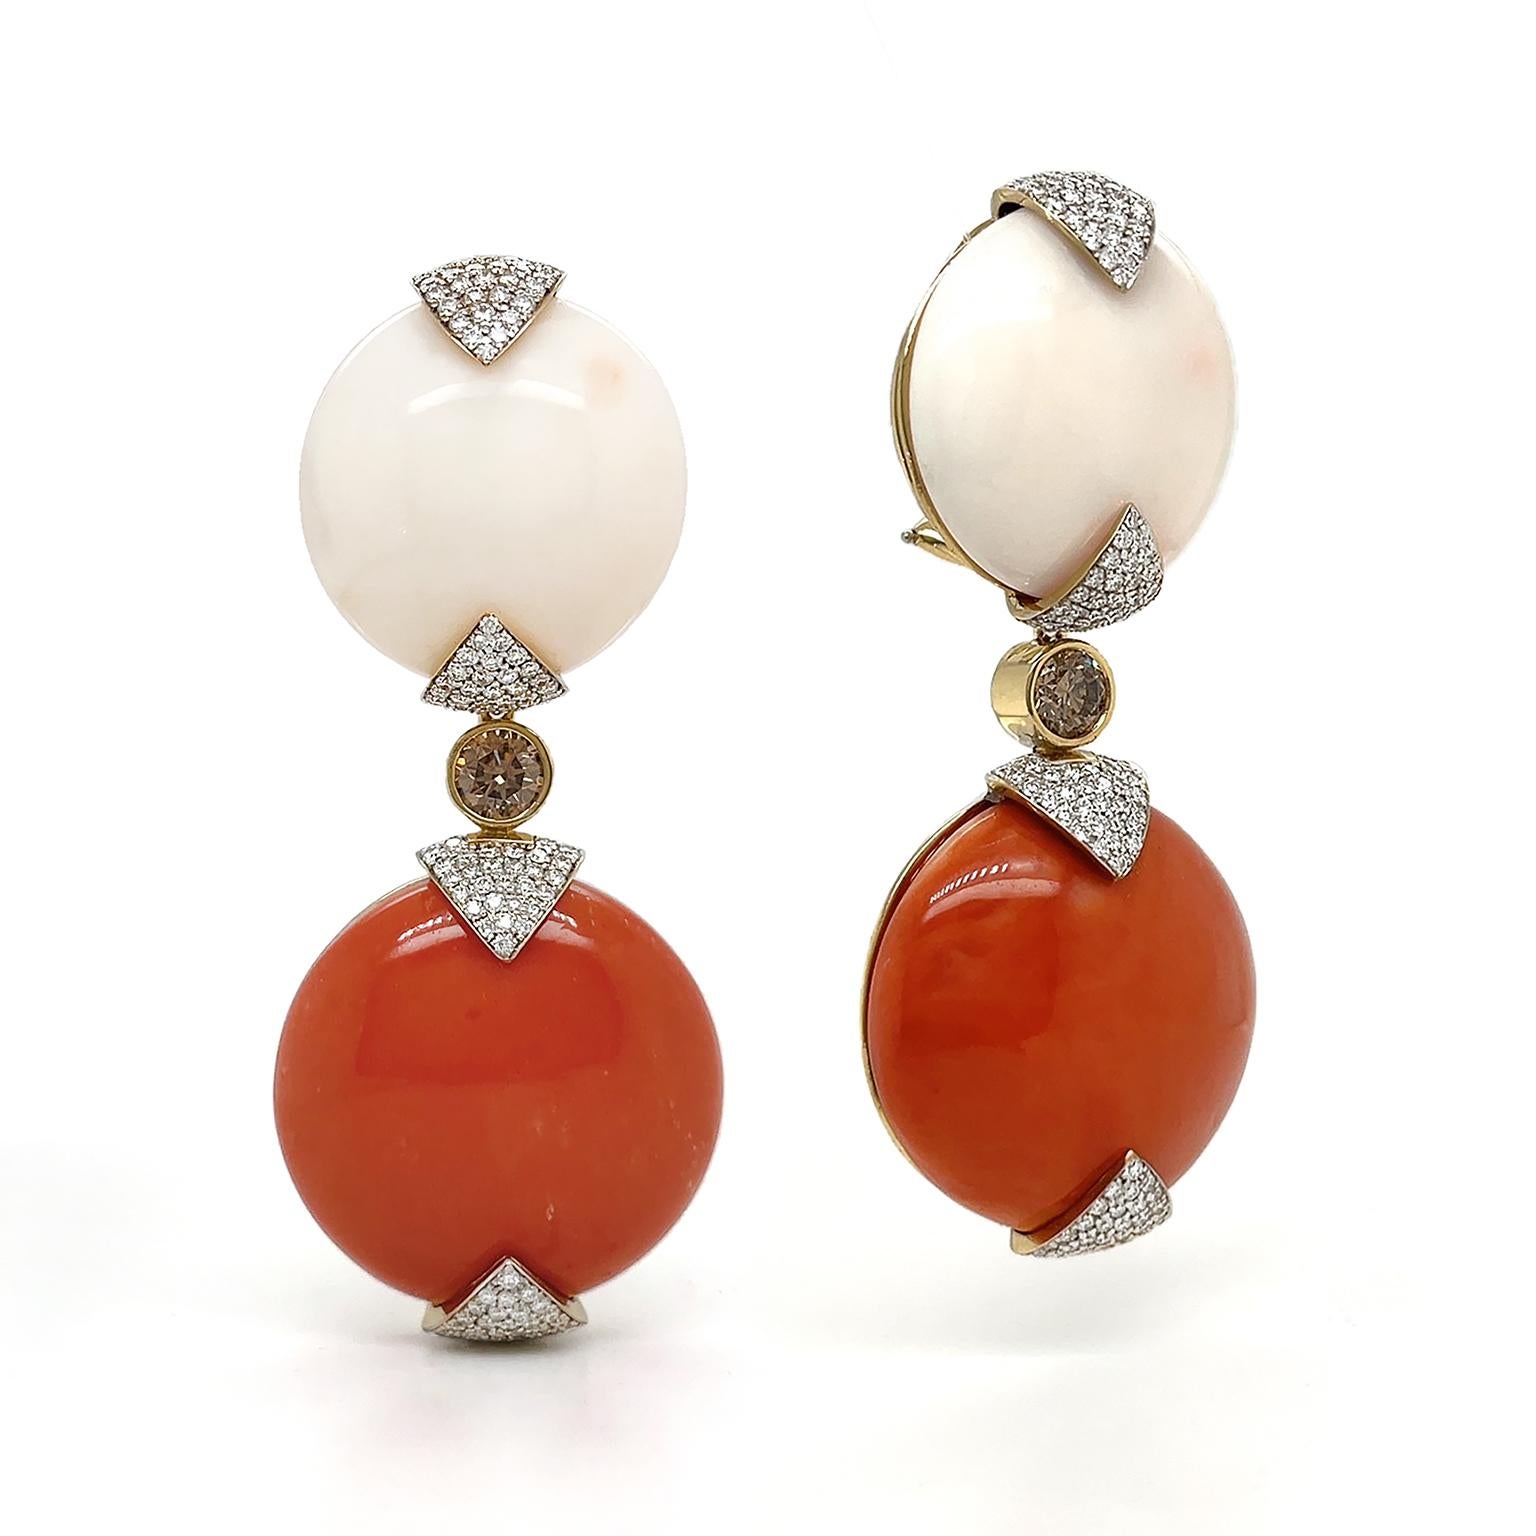 Exceptional white blush and red corals are heightened by the sparkle of white and cognac diamonds. A round-cut white coral begins the motif and is secured by triangle prongs encrusted with brilliant-cut diamonds. The upper triangle is down-turned,